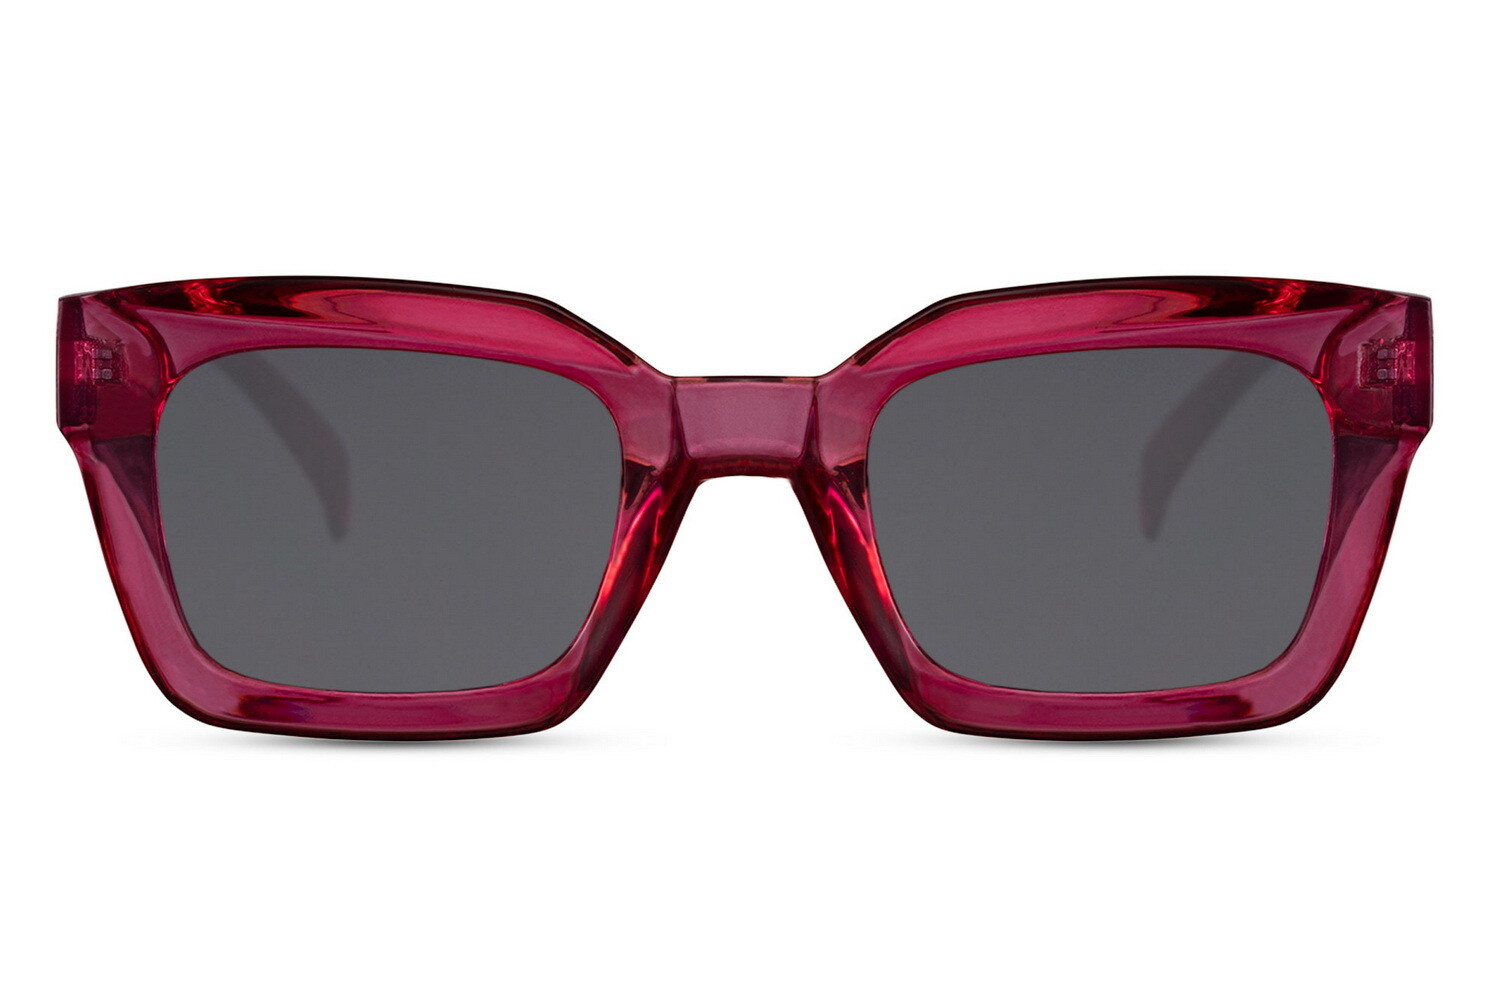 Women's Red-Pink Recycled Plastic Sunglasses